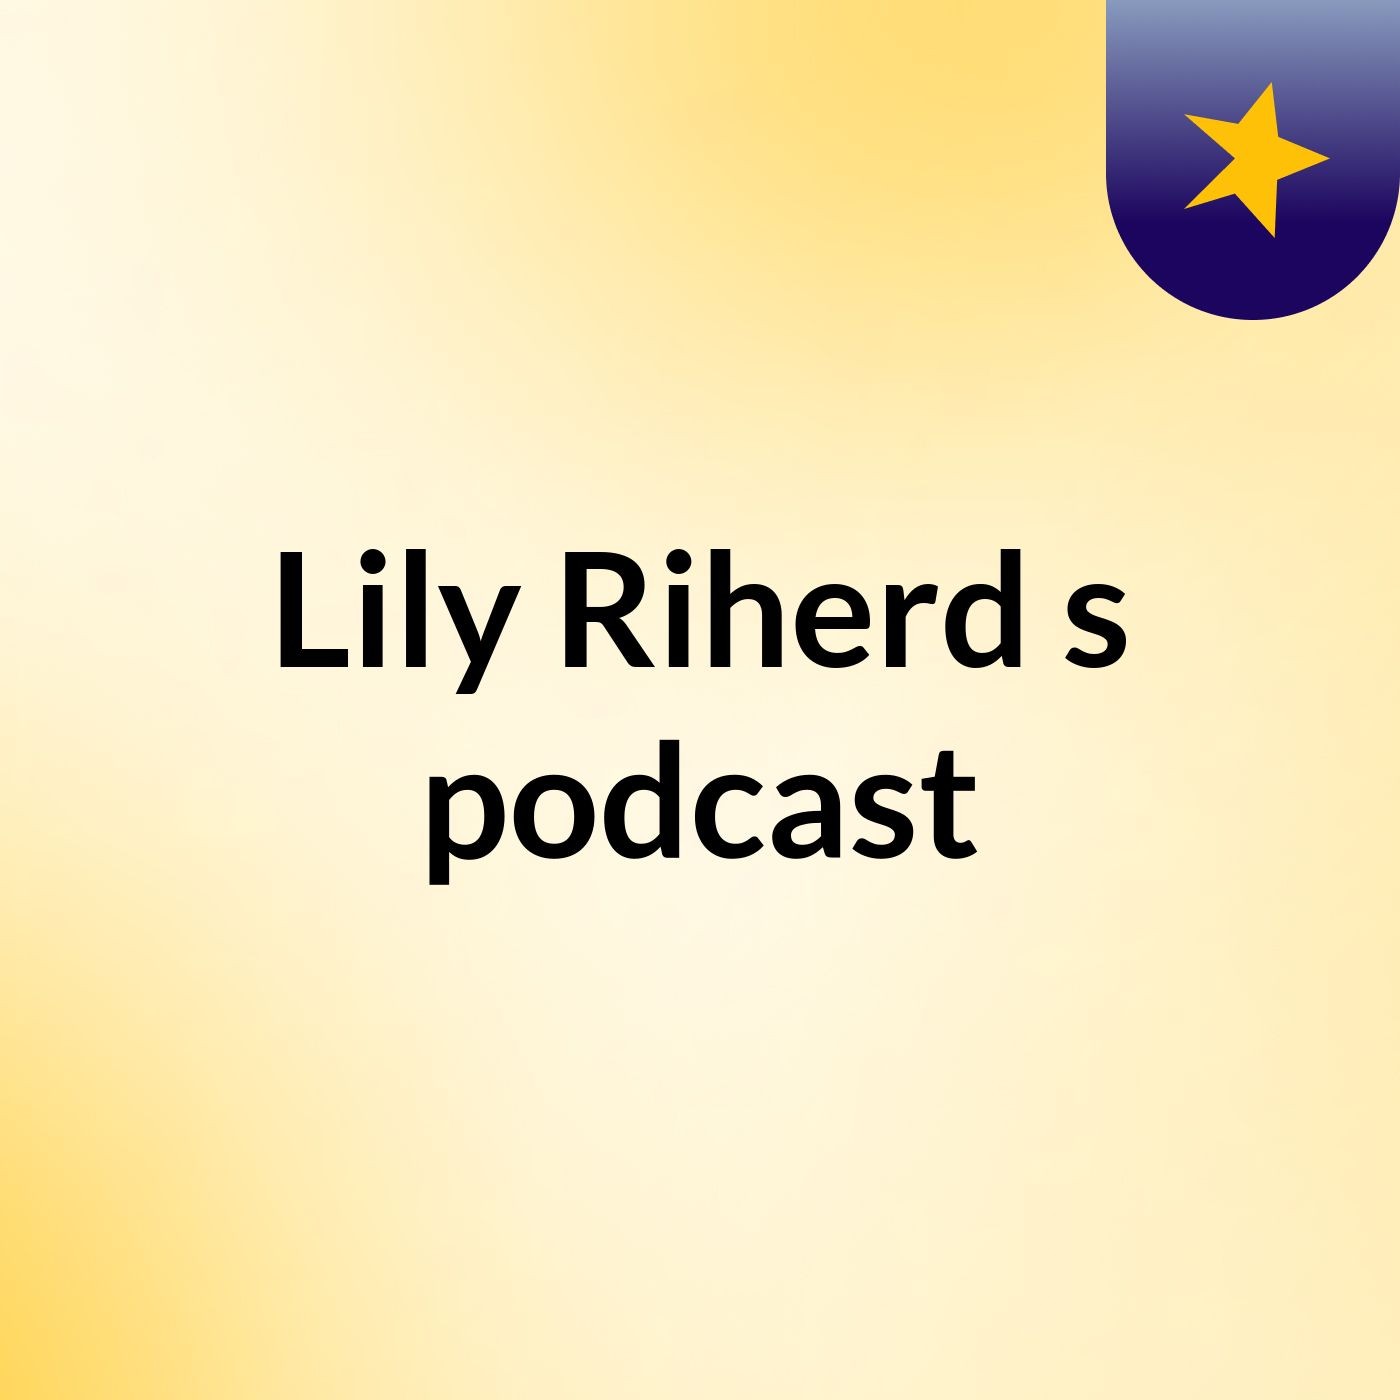 Episode 2 - Lily Riherd's podcast